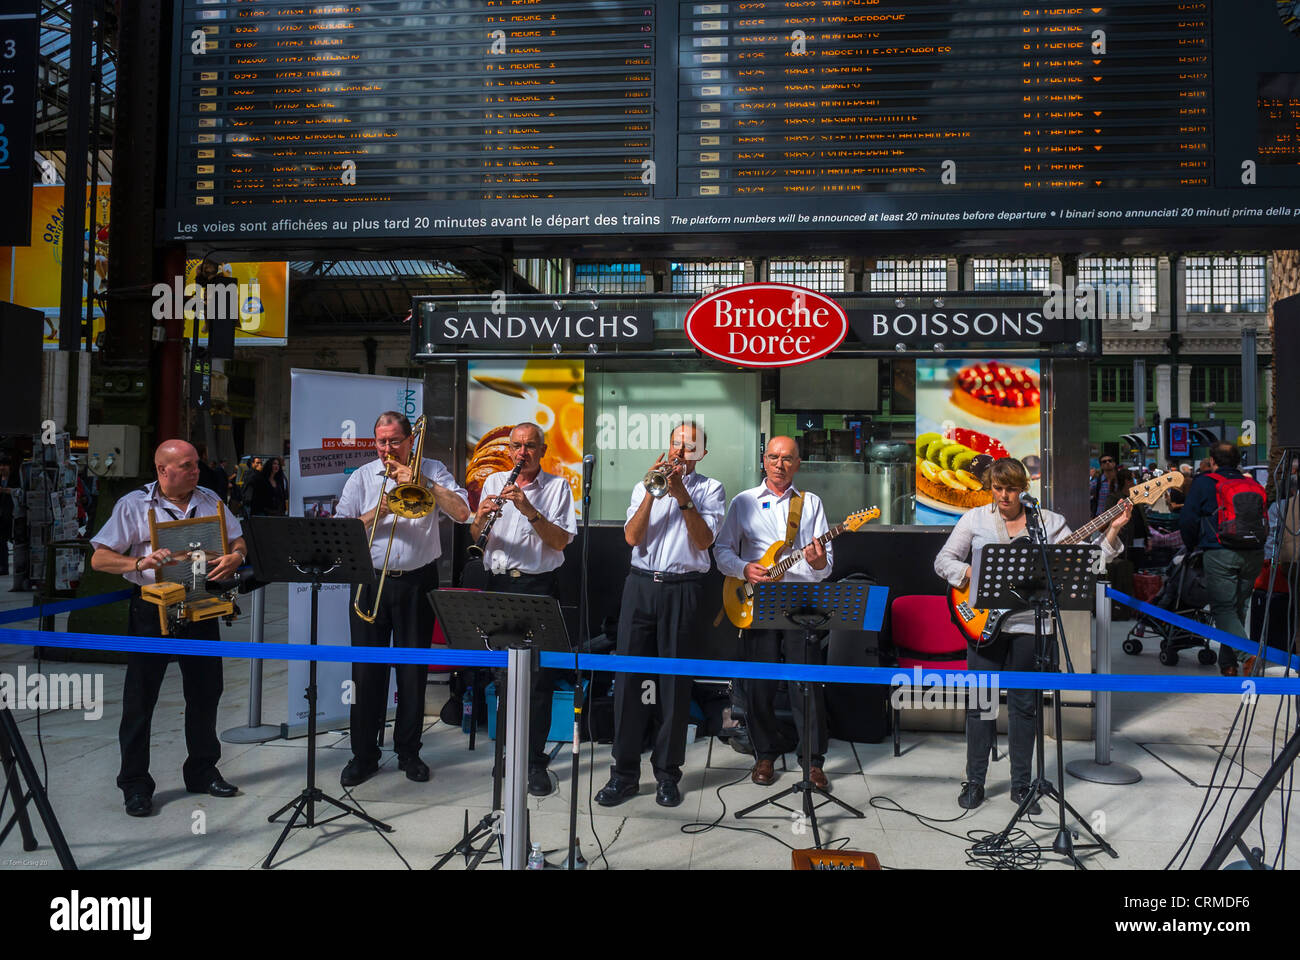 Paris, France, Group of Men, New Orleans Jazz Band, Orchestra Performing in Train Station, National Music Festival, 'Fete de la Musique', American Spring Jazz Band Music Concert Stock Photo